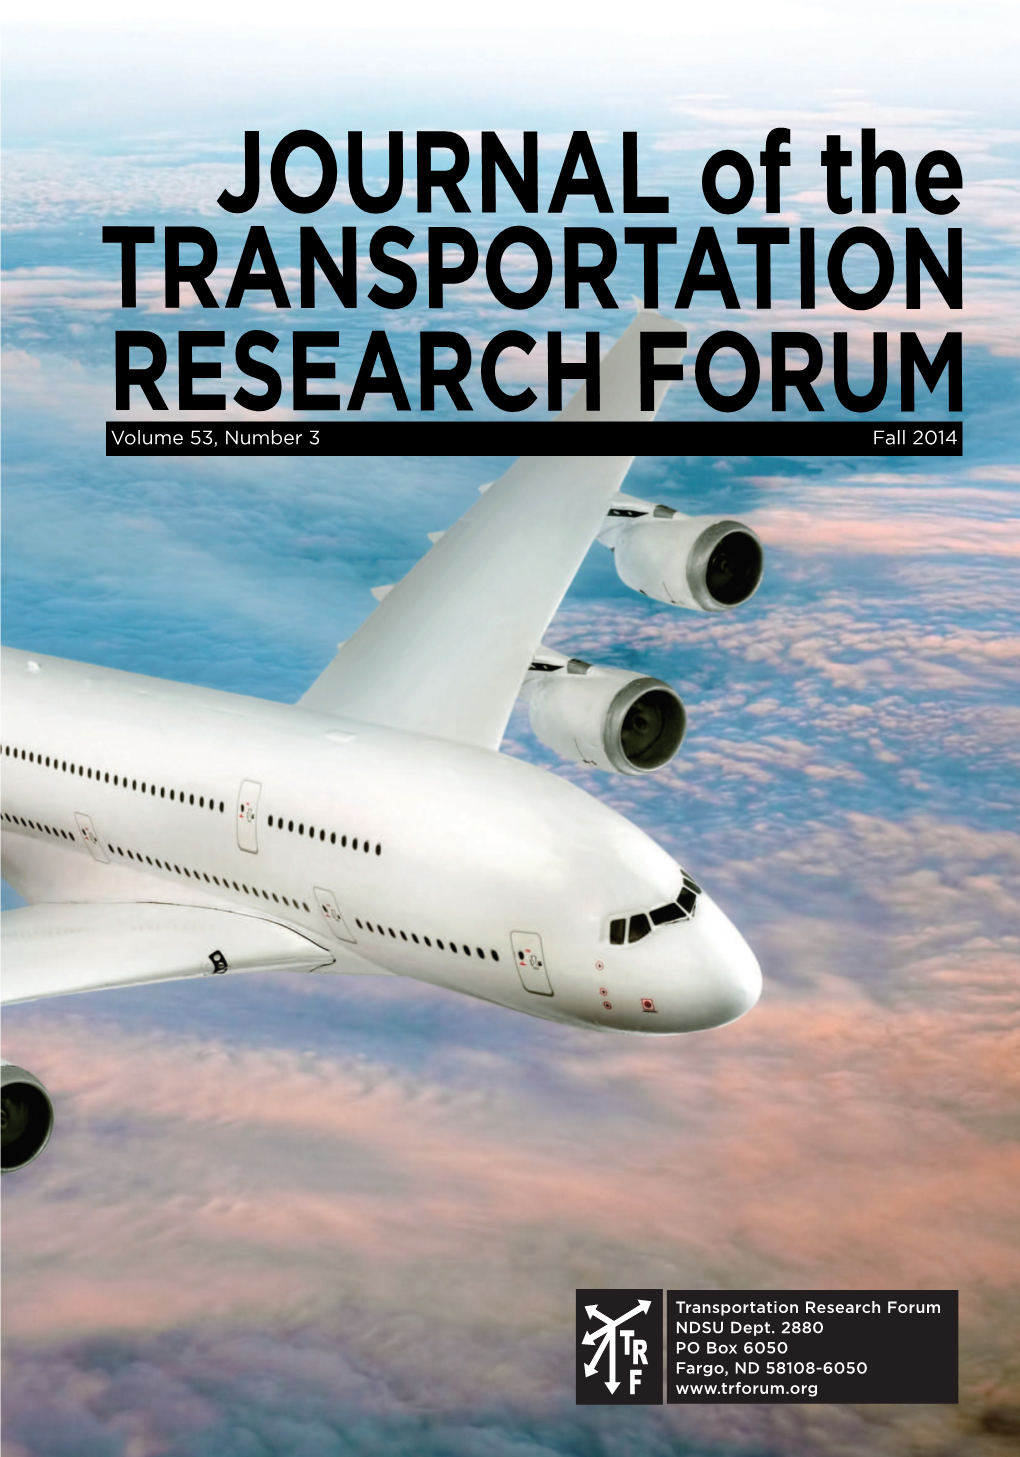 Journal of the Transportation Research Forum: Volume 53, Number 3, Fall 2014